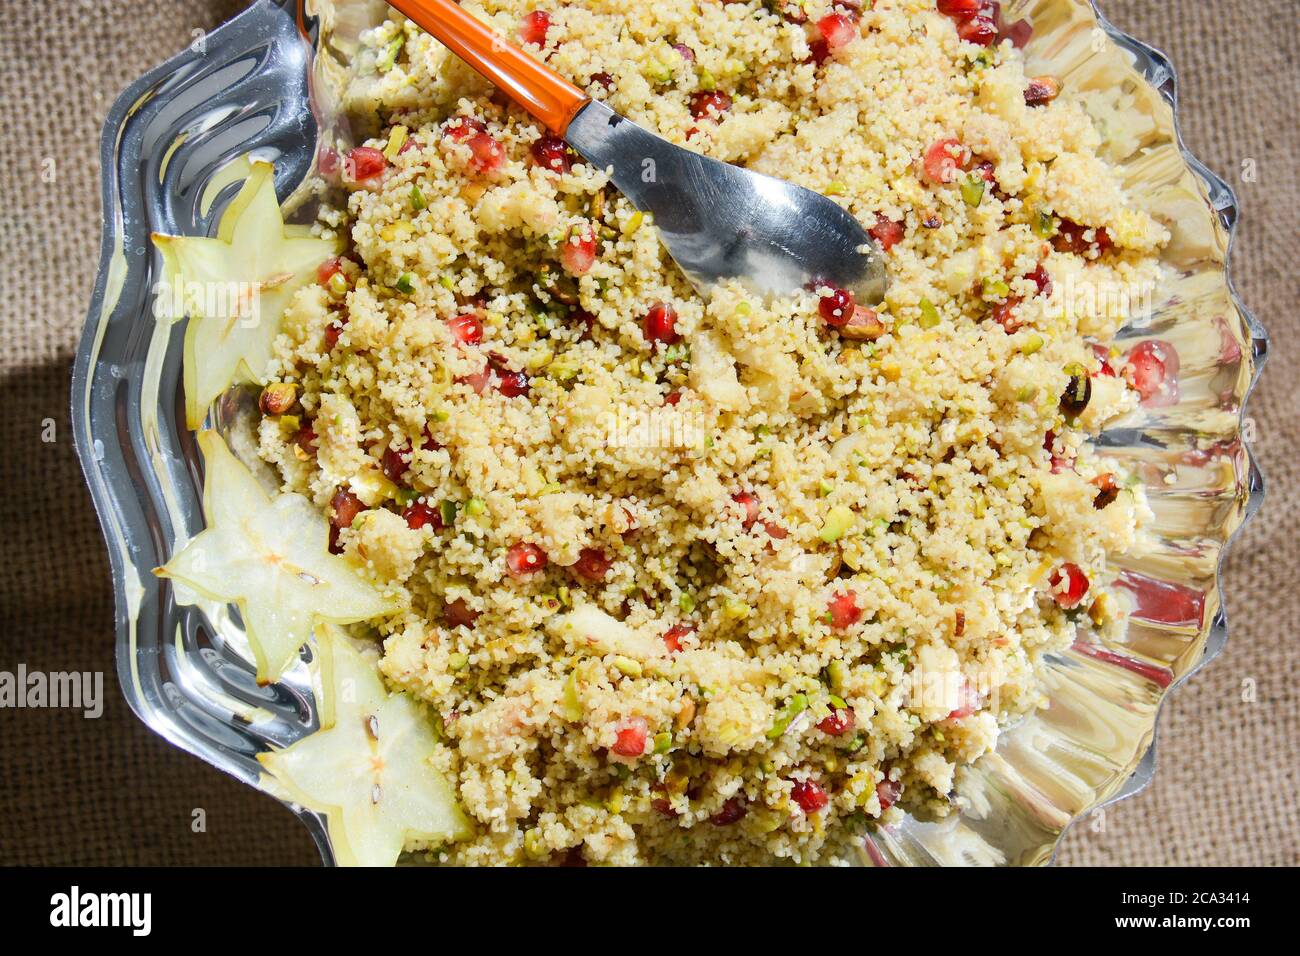 Italian couscous with pomegranate corn pistachios and thinly sliced vegetables. Stock Photo